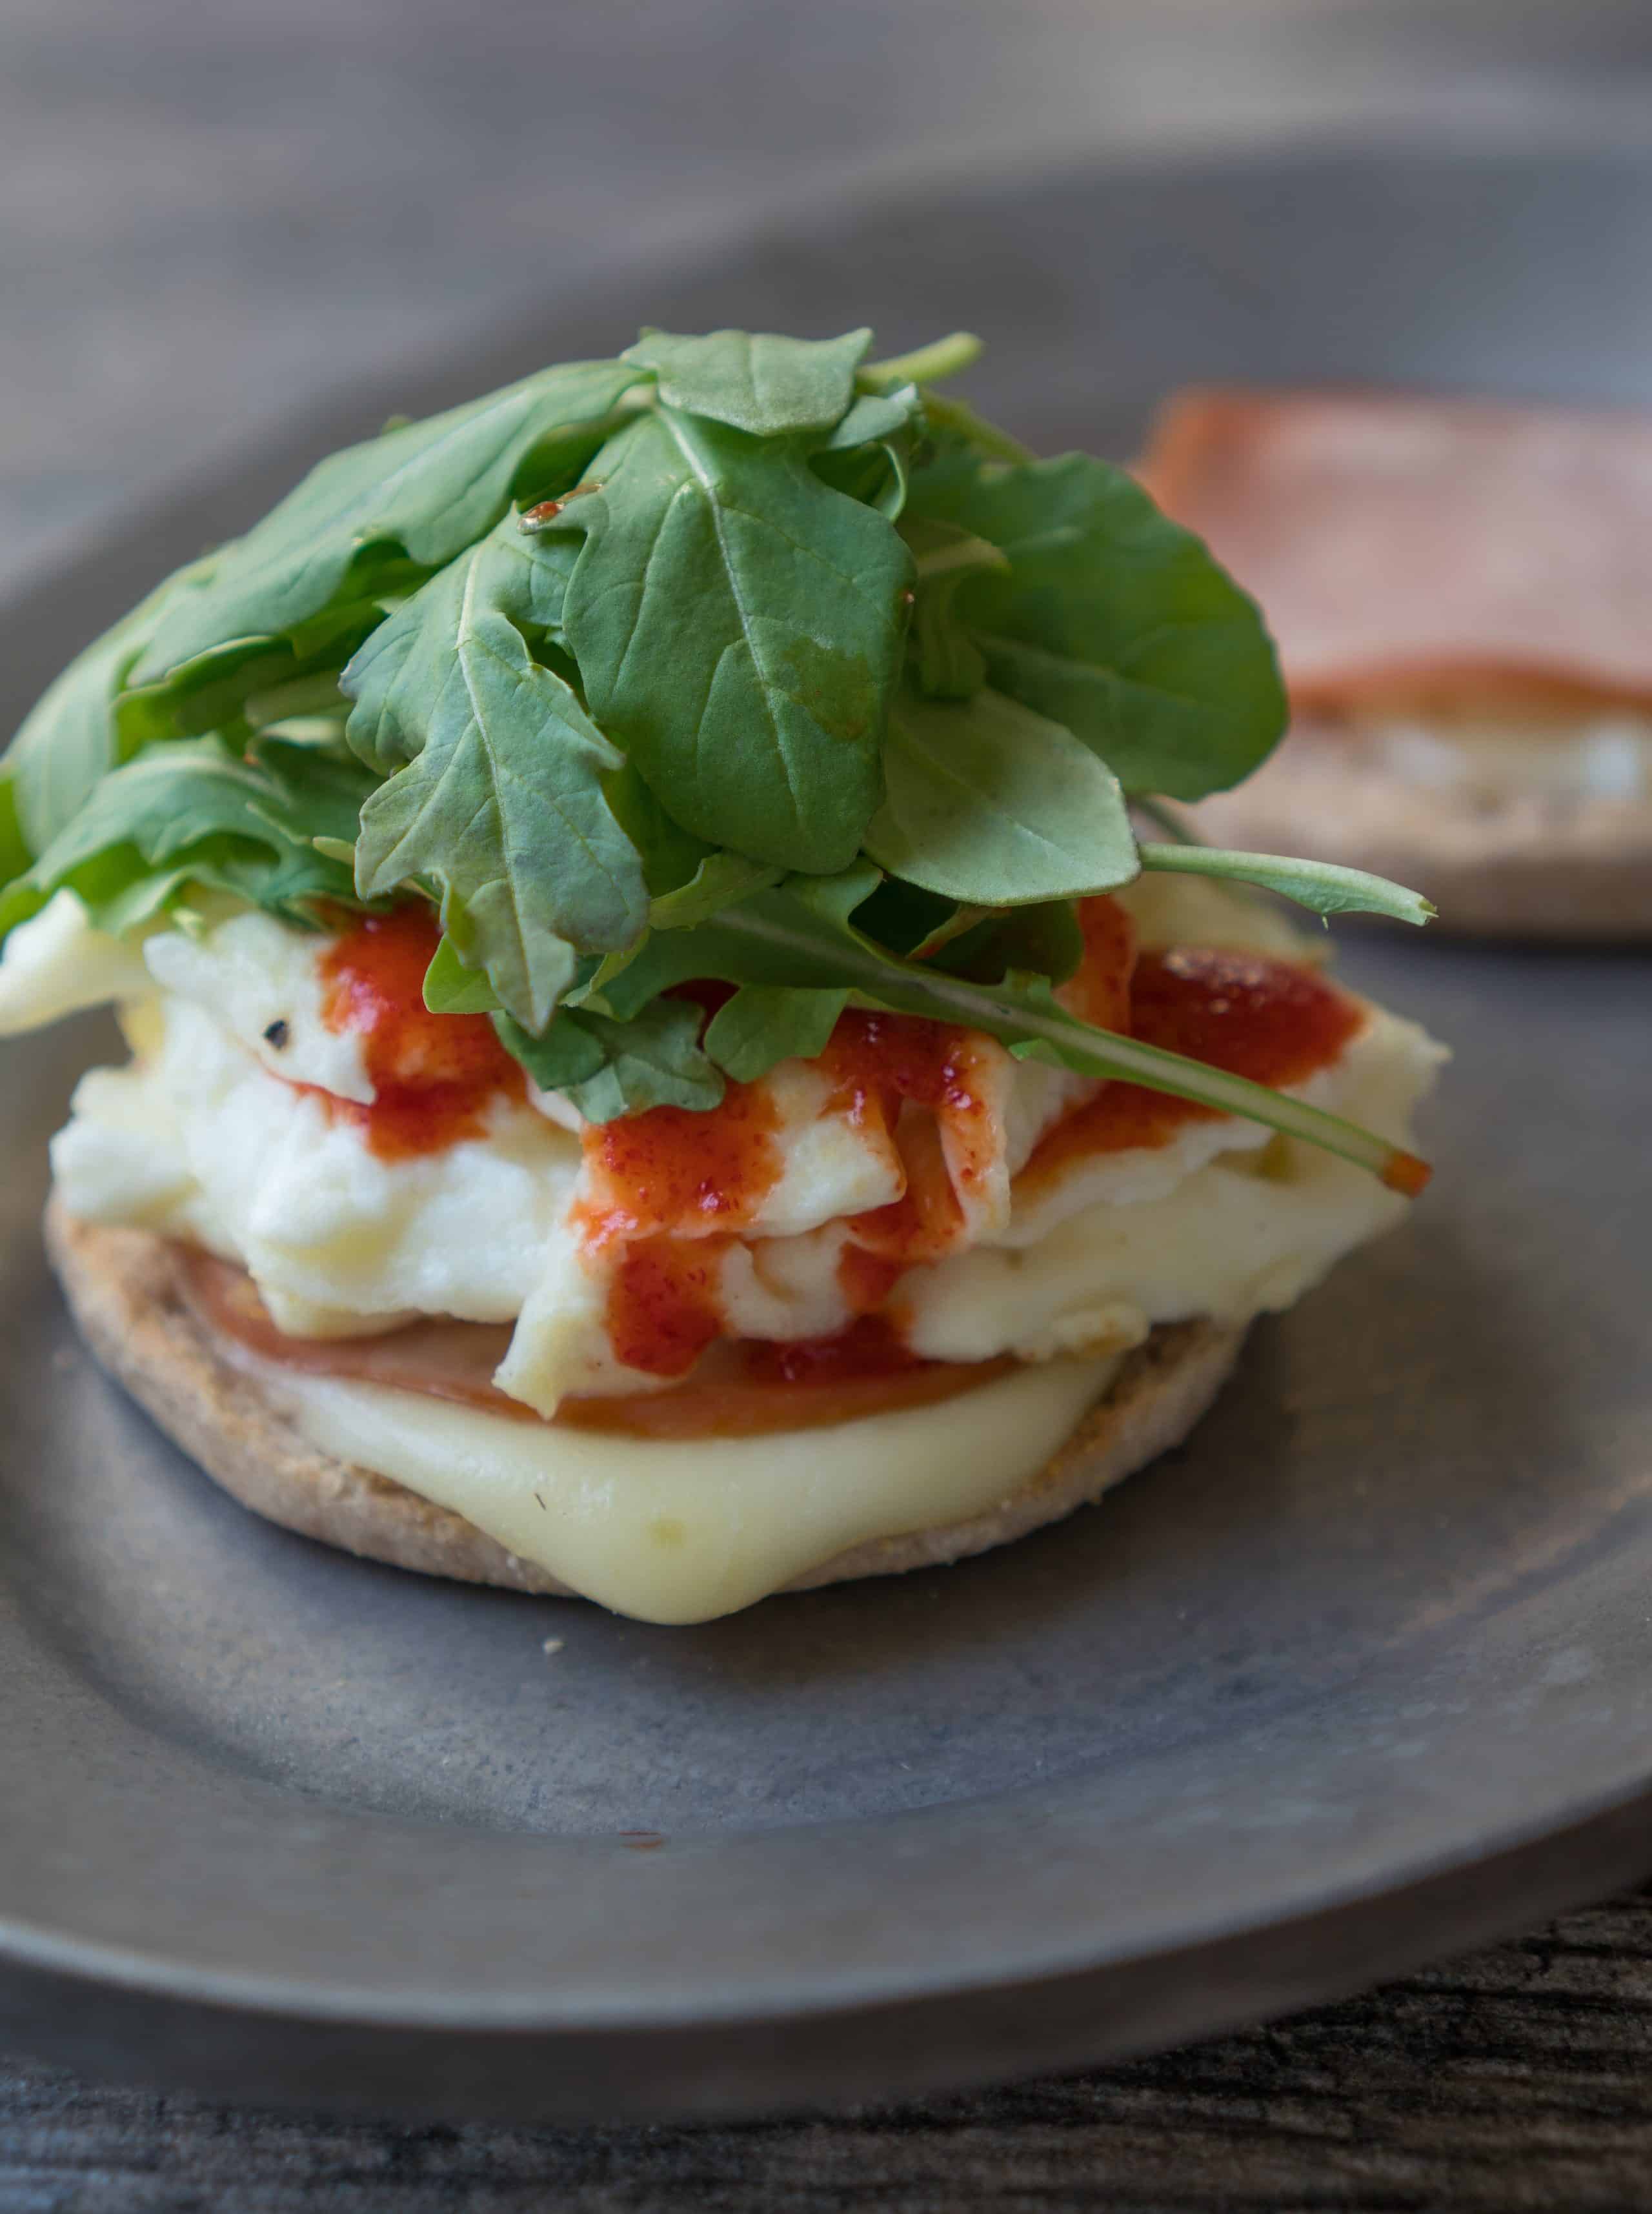 10 Minute Breakfast Sandwich – Healthy recipe for a 10 Minute Breakfast Sandwich! Using fluffy egg whites, melted cheese, lean Canadian bacon, a dash of hot sauce, and fresh arugula on a toasted whole wheat English muffin. High protein, low fat and macro-friendly ♥ | freeyourfork.com